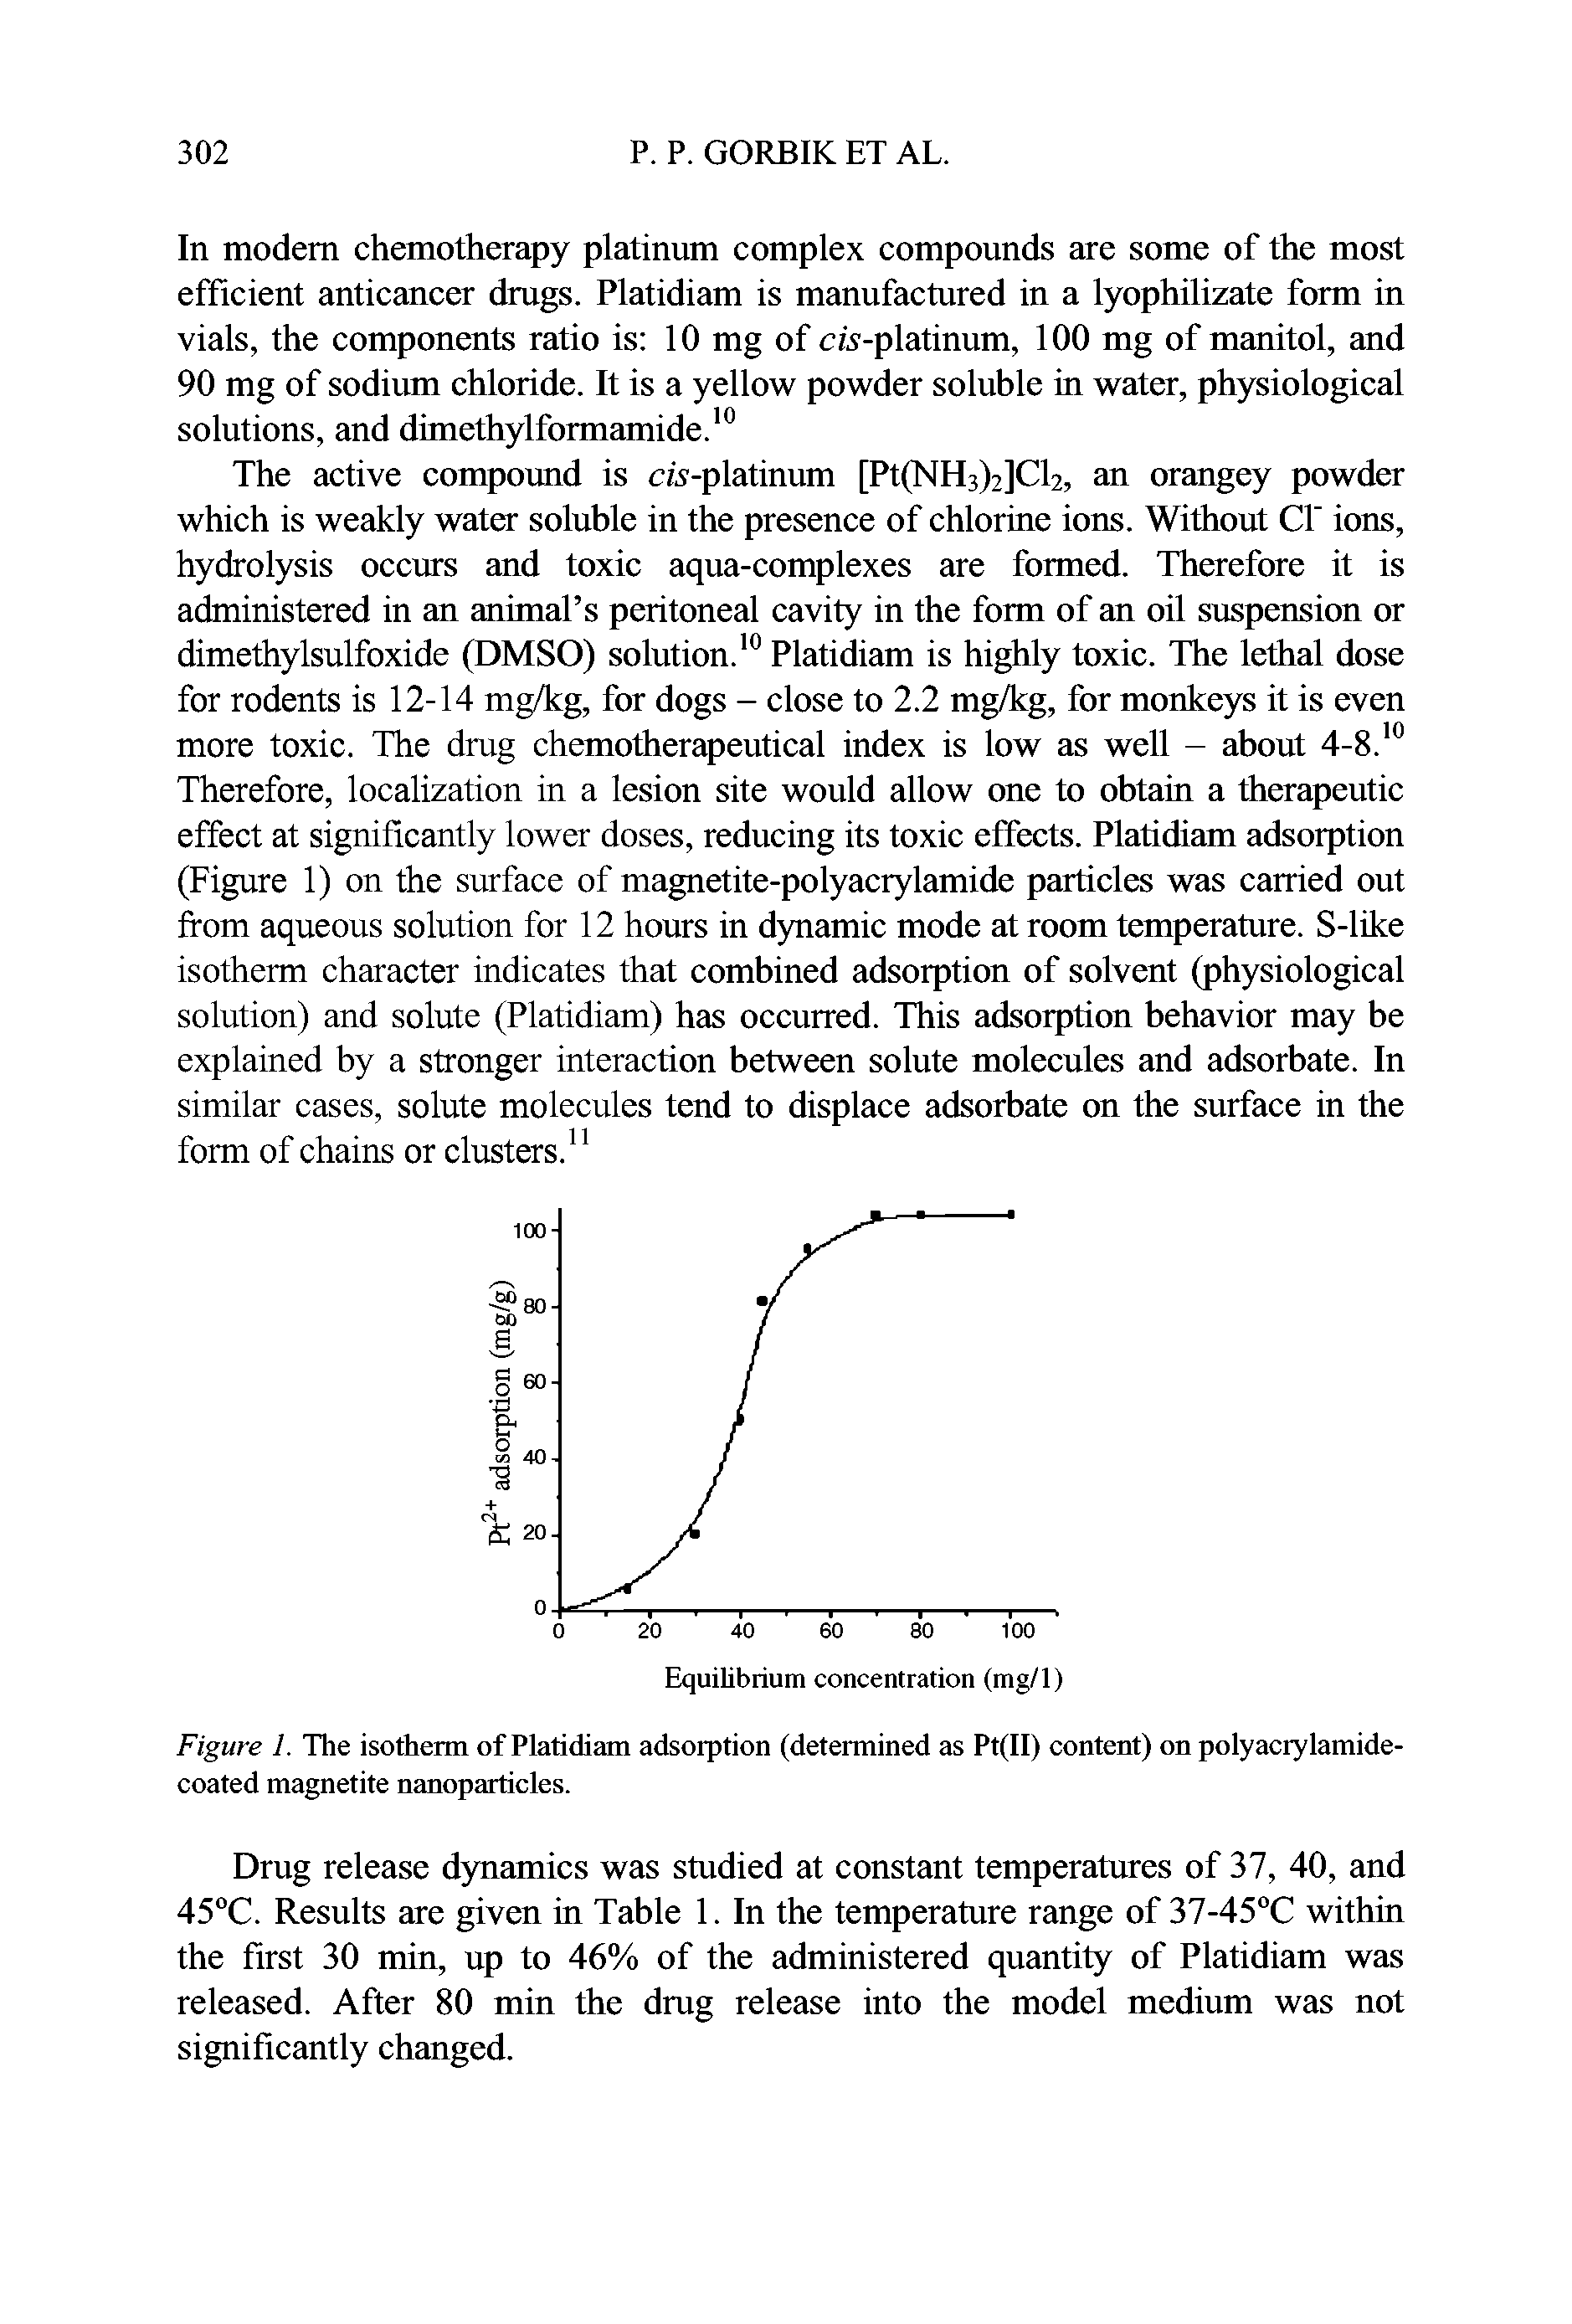 Figure 1. The isotherm of Platidiam adsorption (determined as Pt(II) content) on polyacrylamide-coated magnetite nanoparticles.